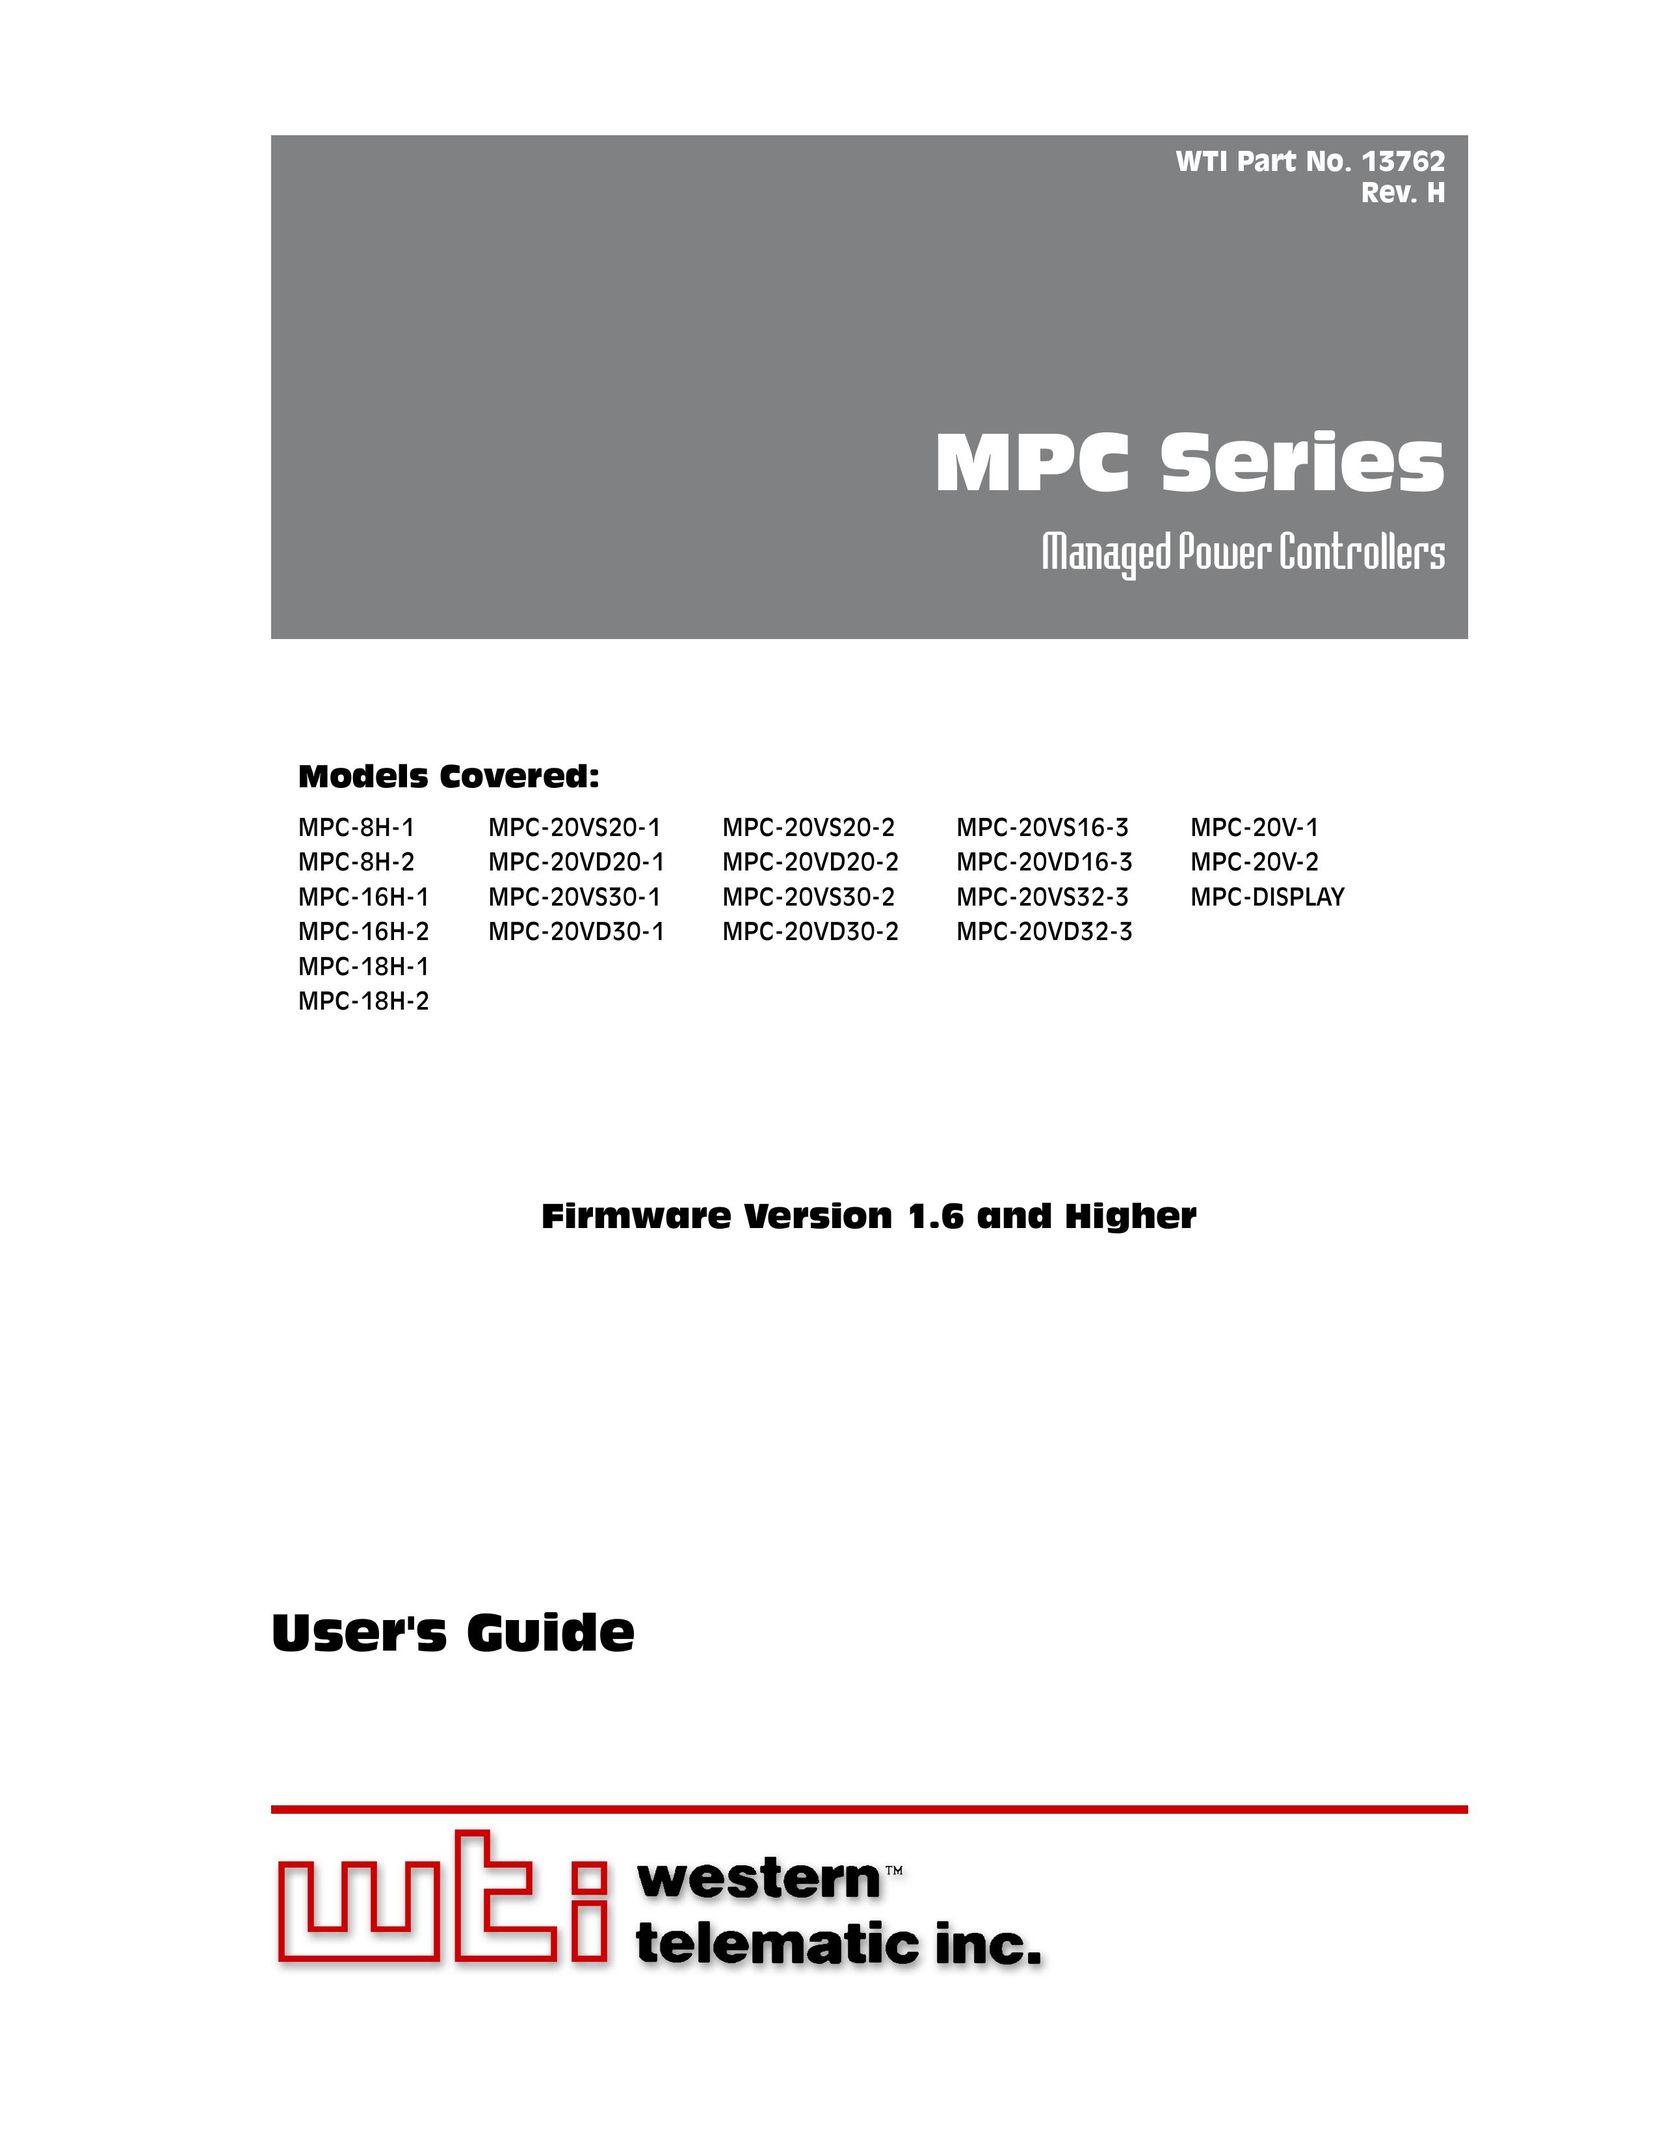 Western Telematic MPC-DISPLAY Network Card User Manual